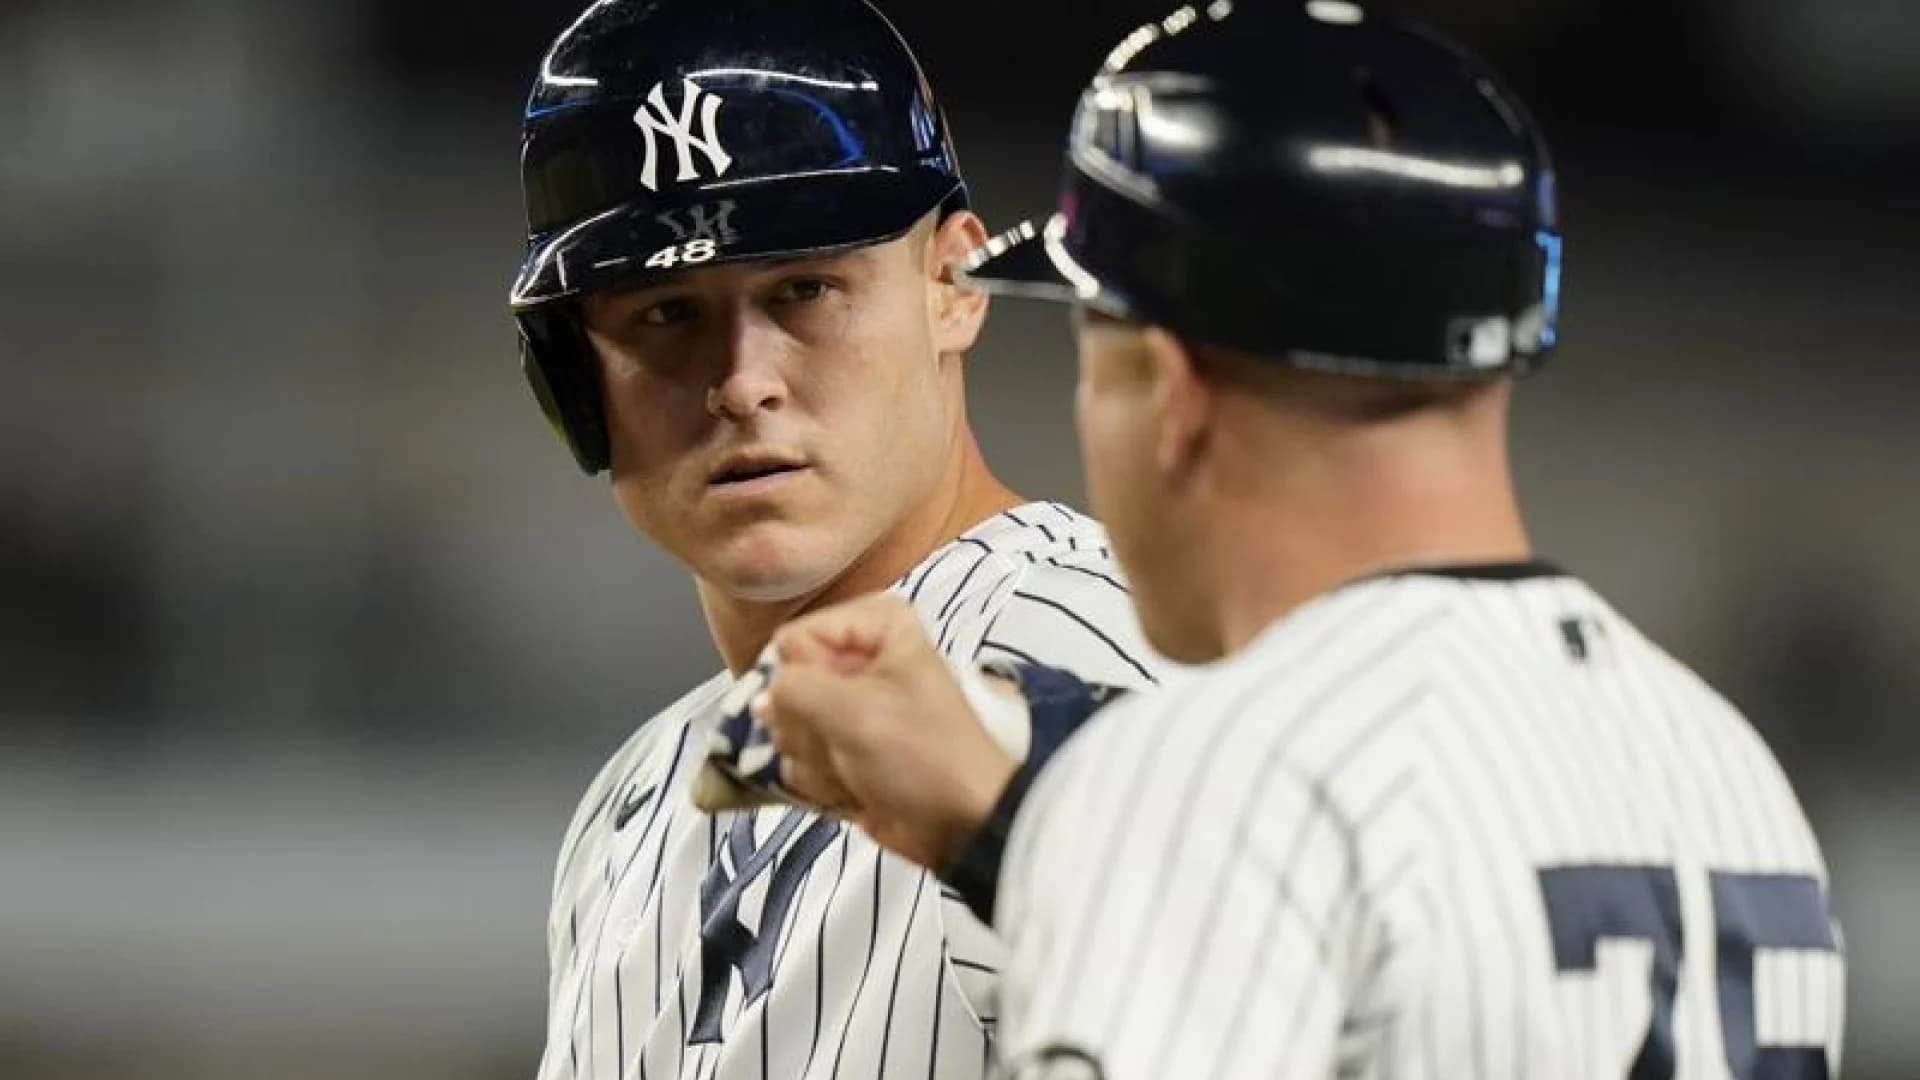 Reggie Willits 4th to leave Boone’s Yankees coaching staff